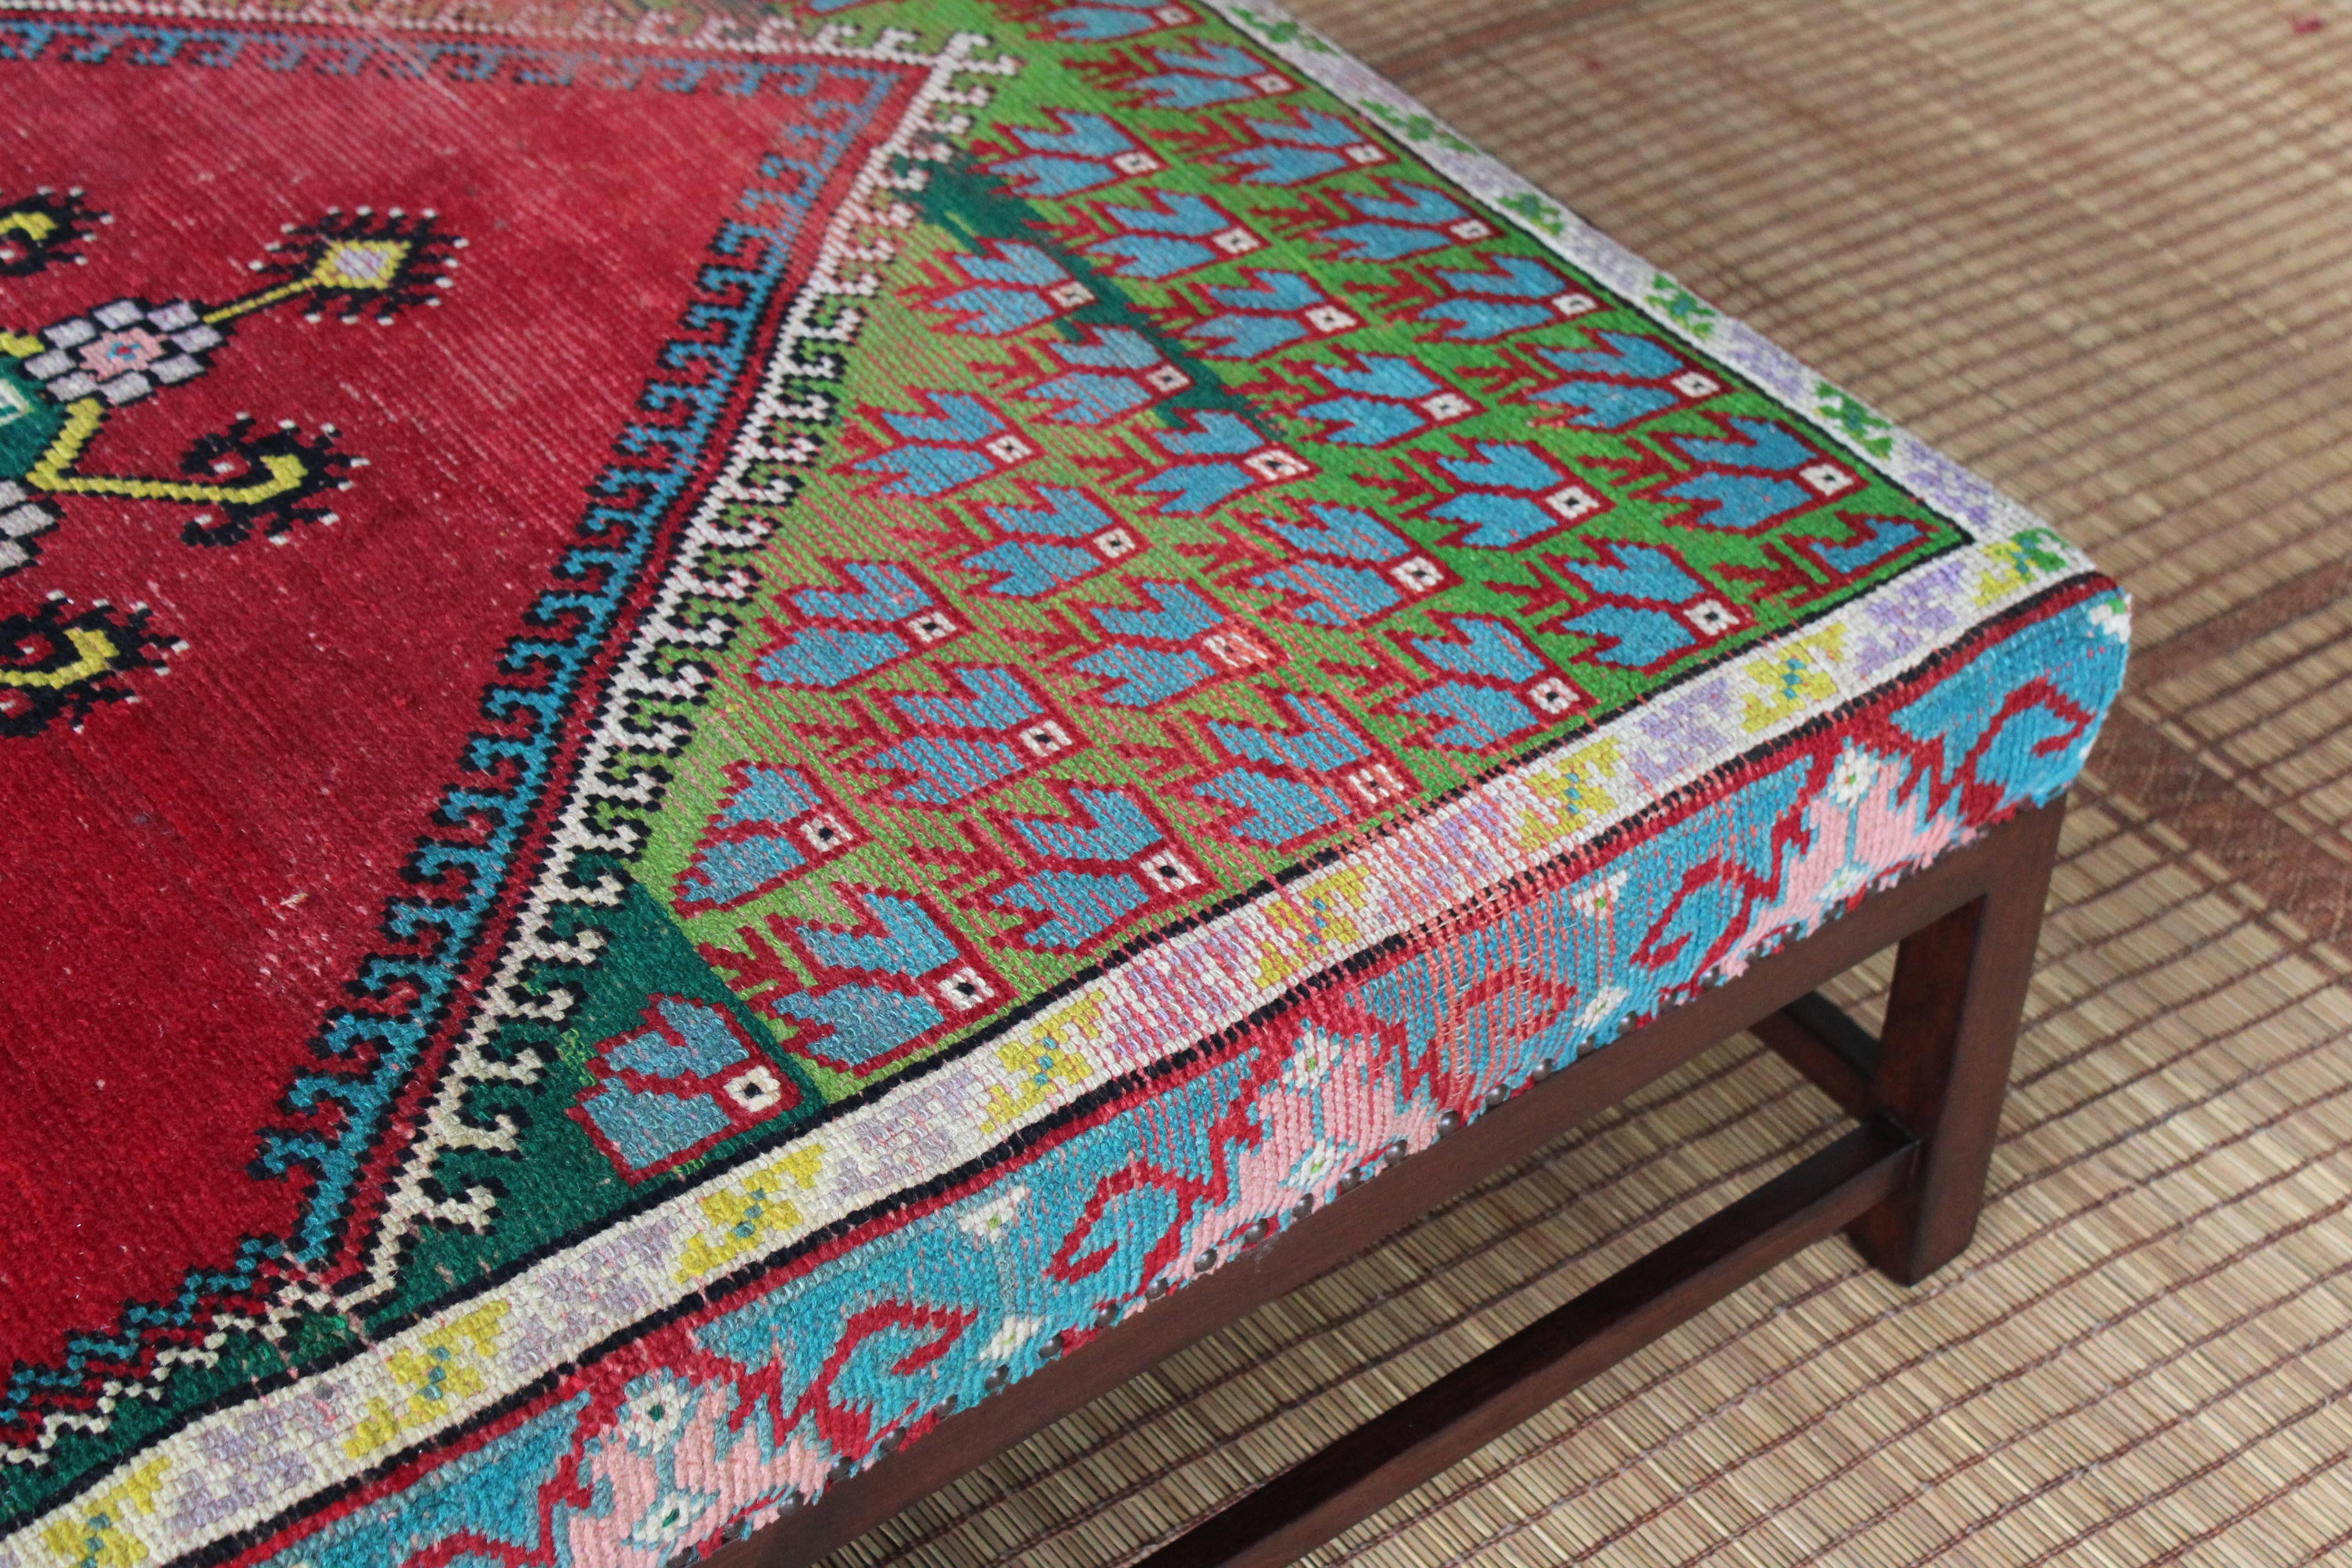 Custom-made Lexington ottoman by Hollywood at Home. Features a walnut base and upholstered in a vibrant vintage rug.